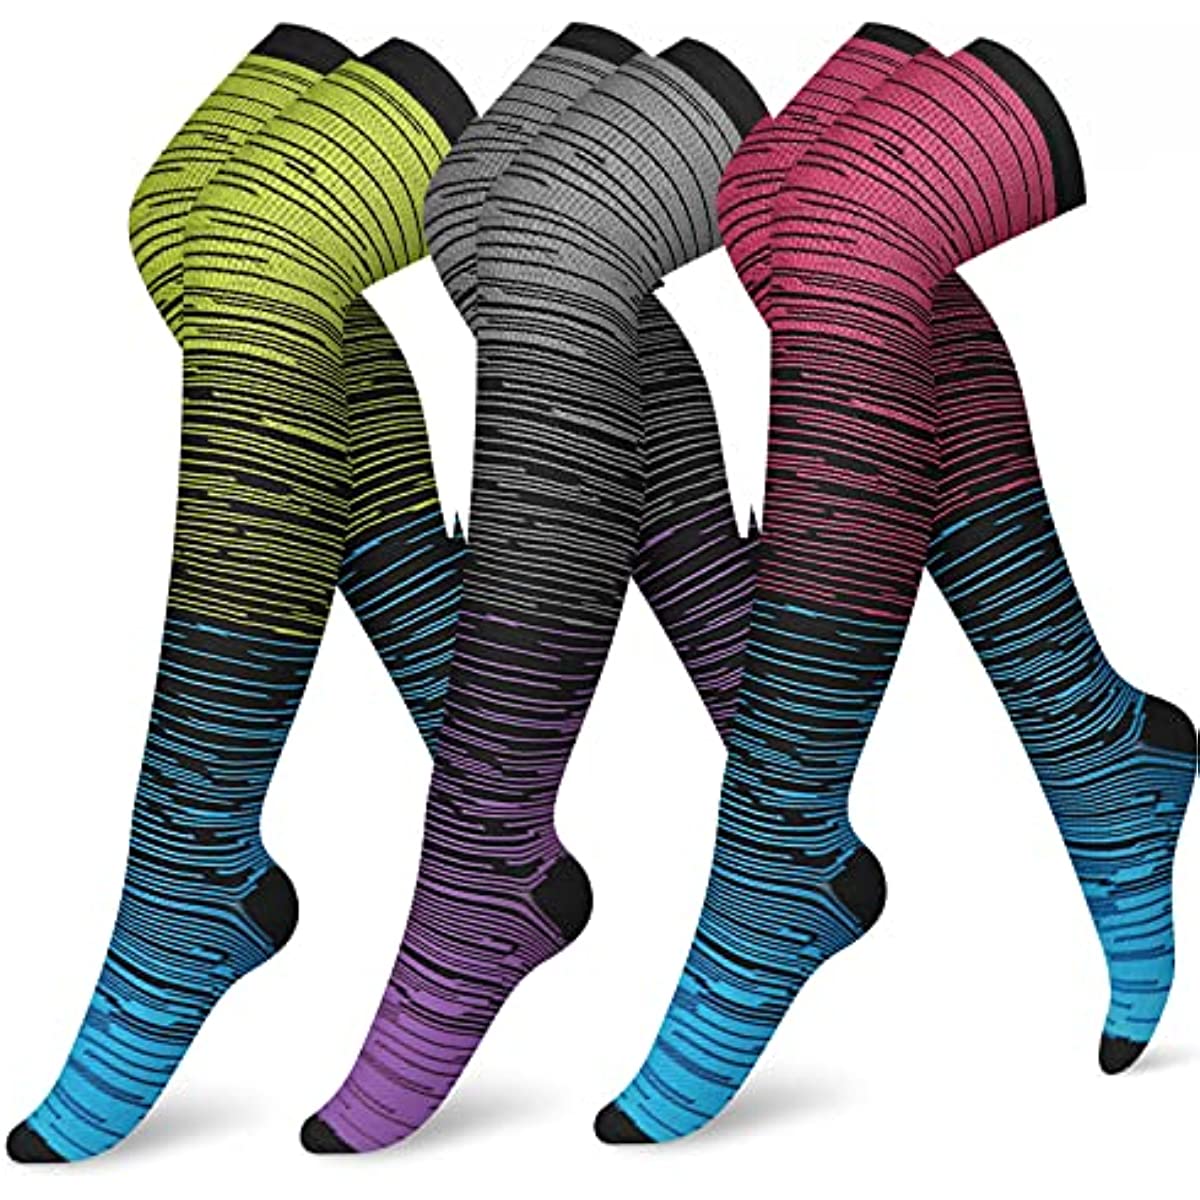 Compression Socks (3 Pairs) Knee High Compression Sock for Women & Men Stockings for Running, Cycling,Athletic